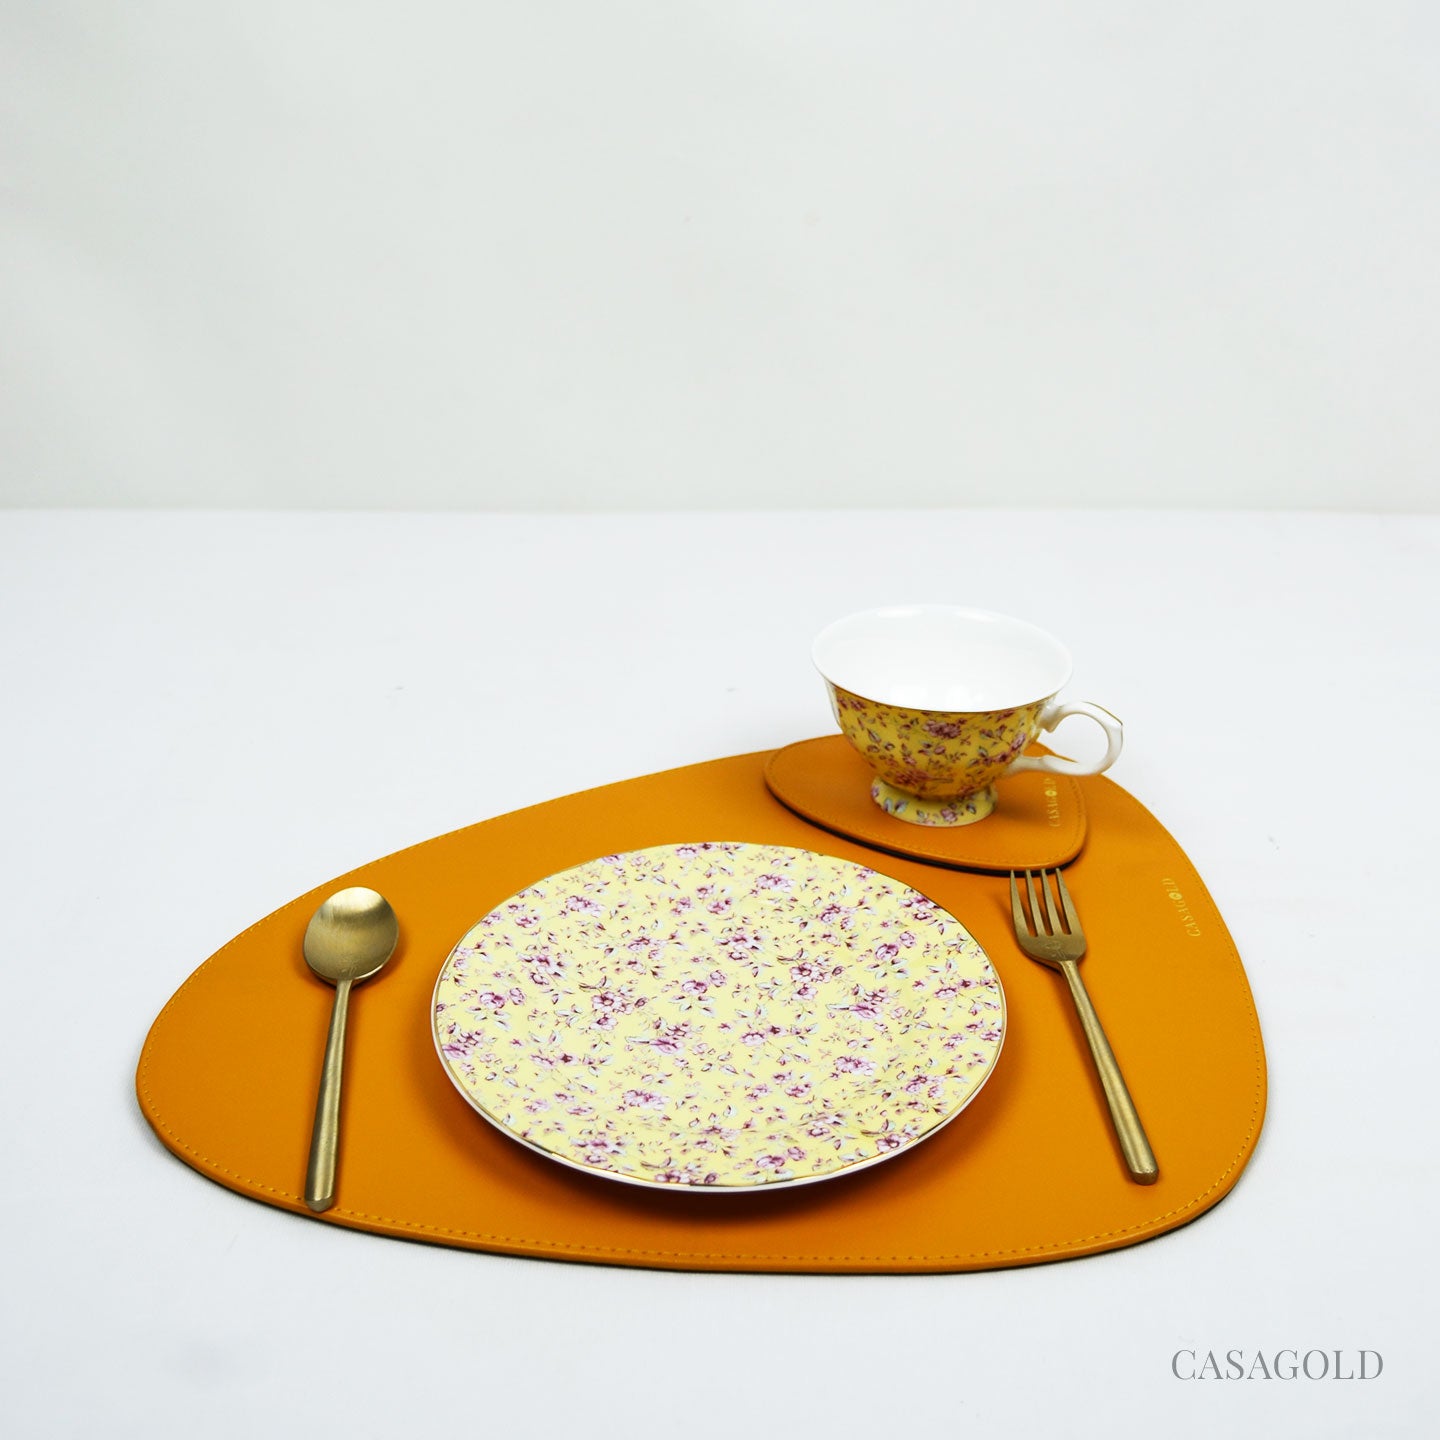 Mustard & Blue Leather Placemat & Coaster